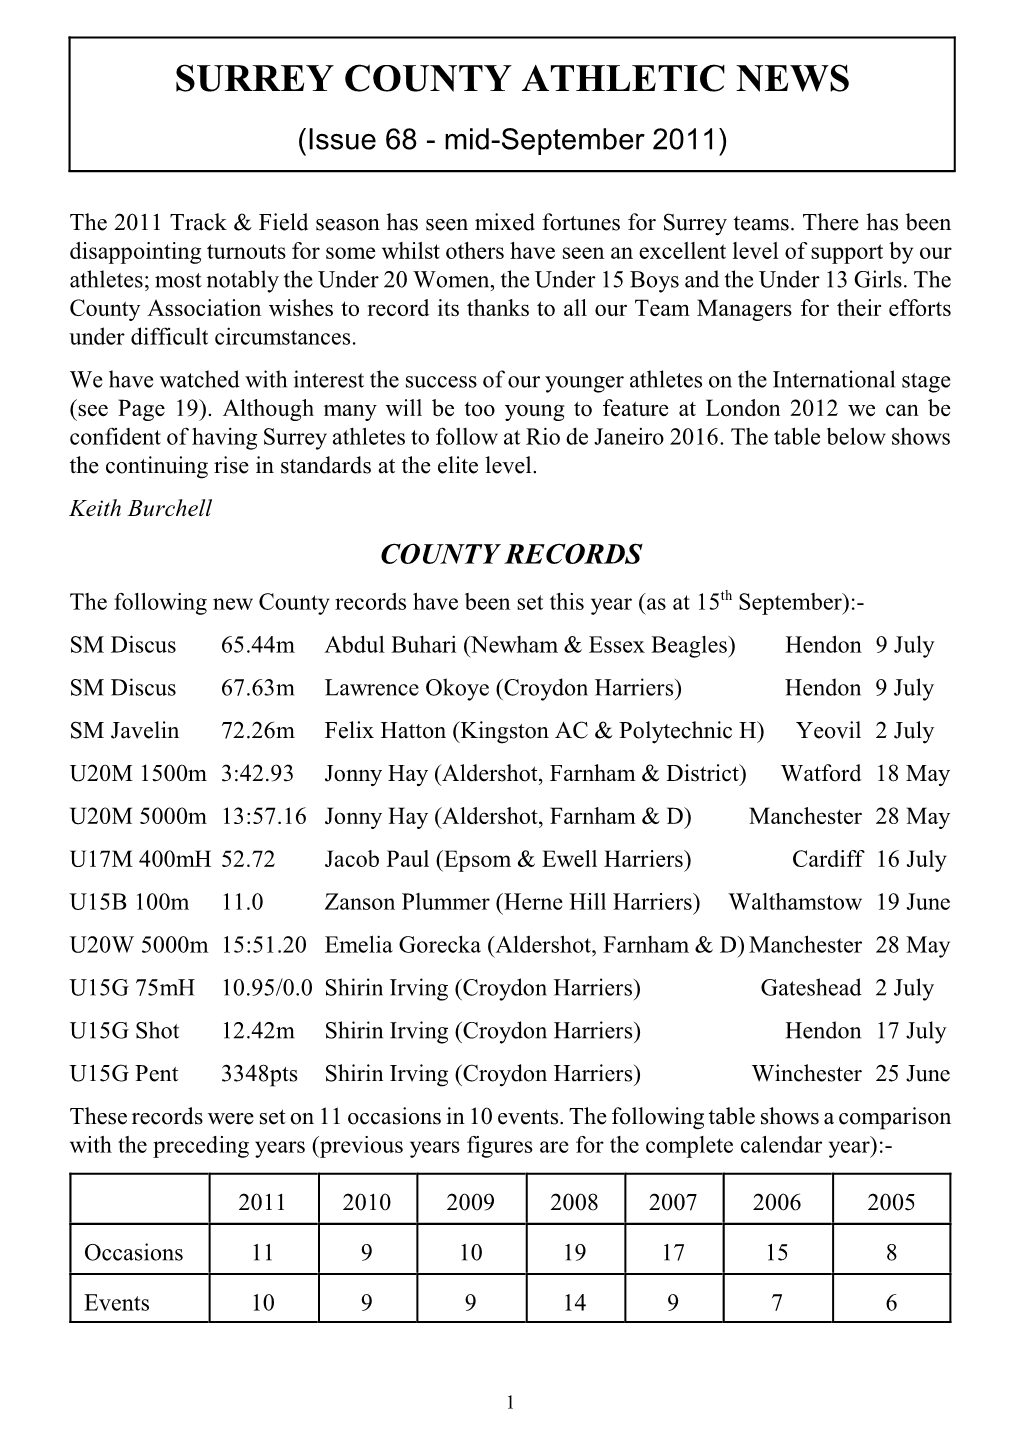 SURREY COUNTY ATHLETIC NEWS (Issue 68 - Mid-September 2011)